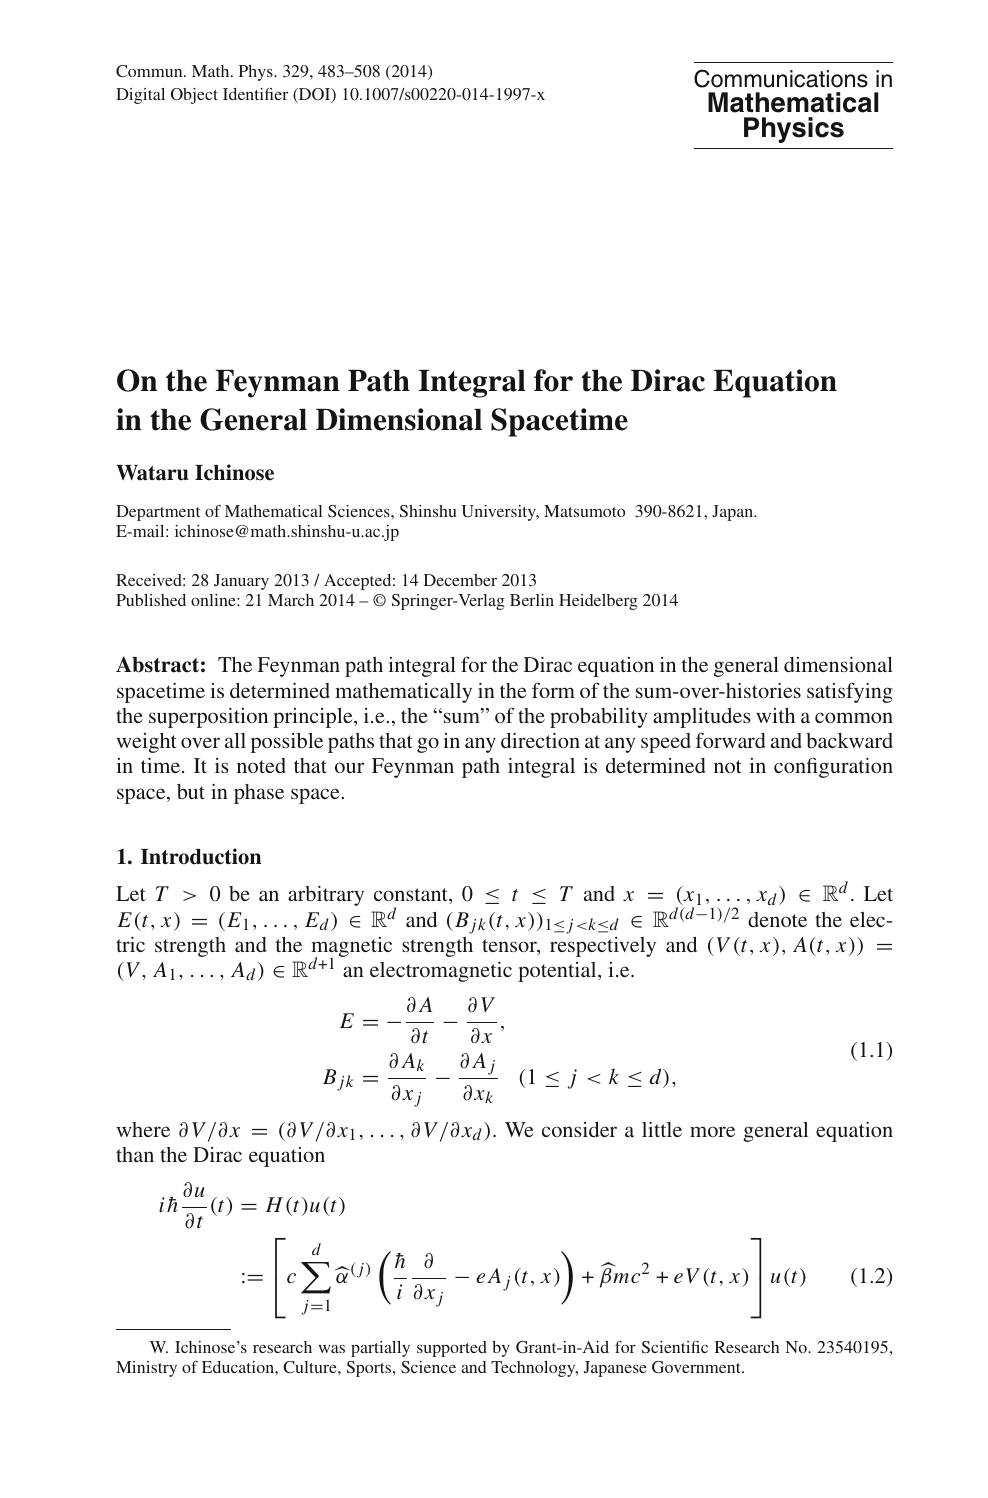 On The Feynman Path Integral For The Dirac Equation In The General Dimensional Spacetime Topic Of Research Paper In Mathematics Download Scholarly Article Pdf And Read For Free On Cyberleninka Open